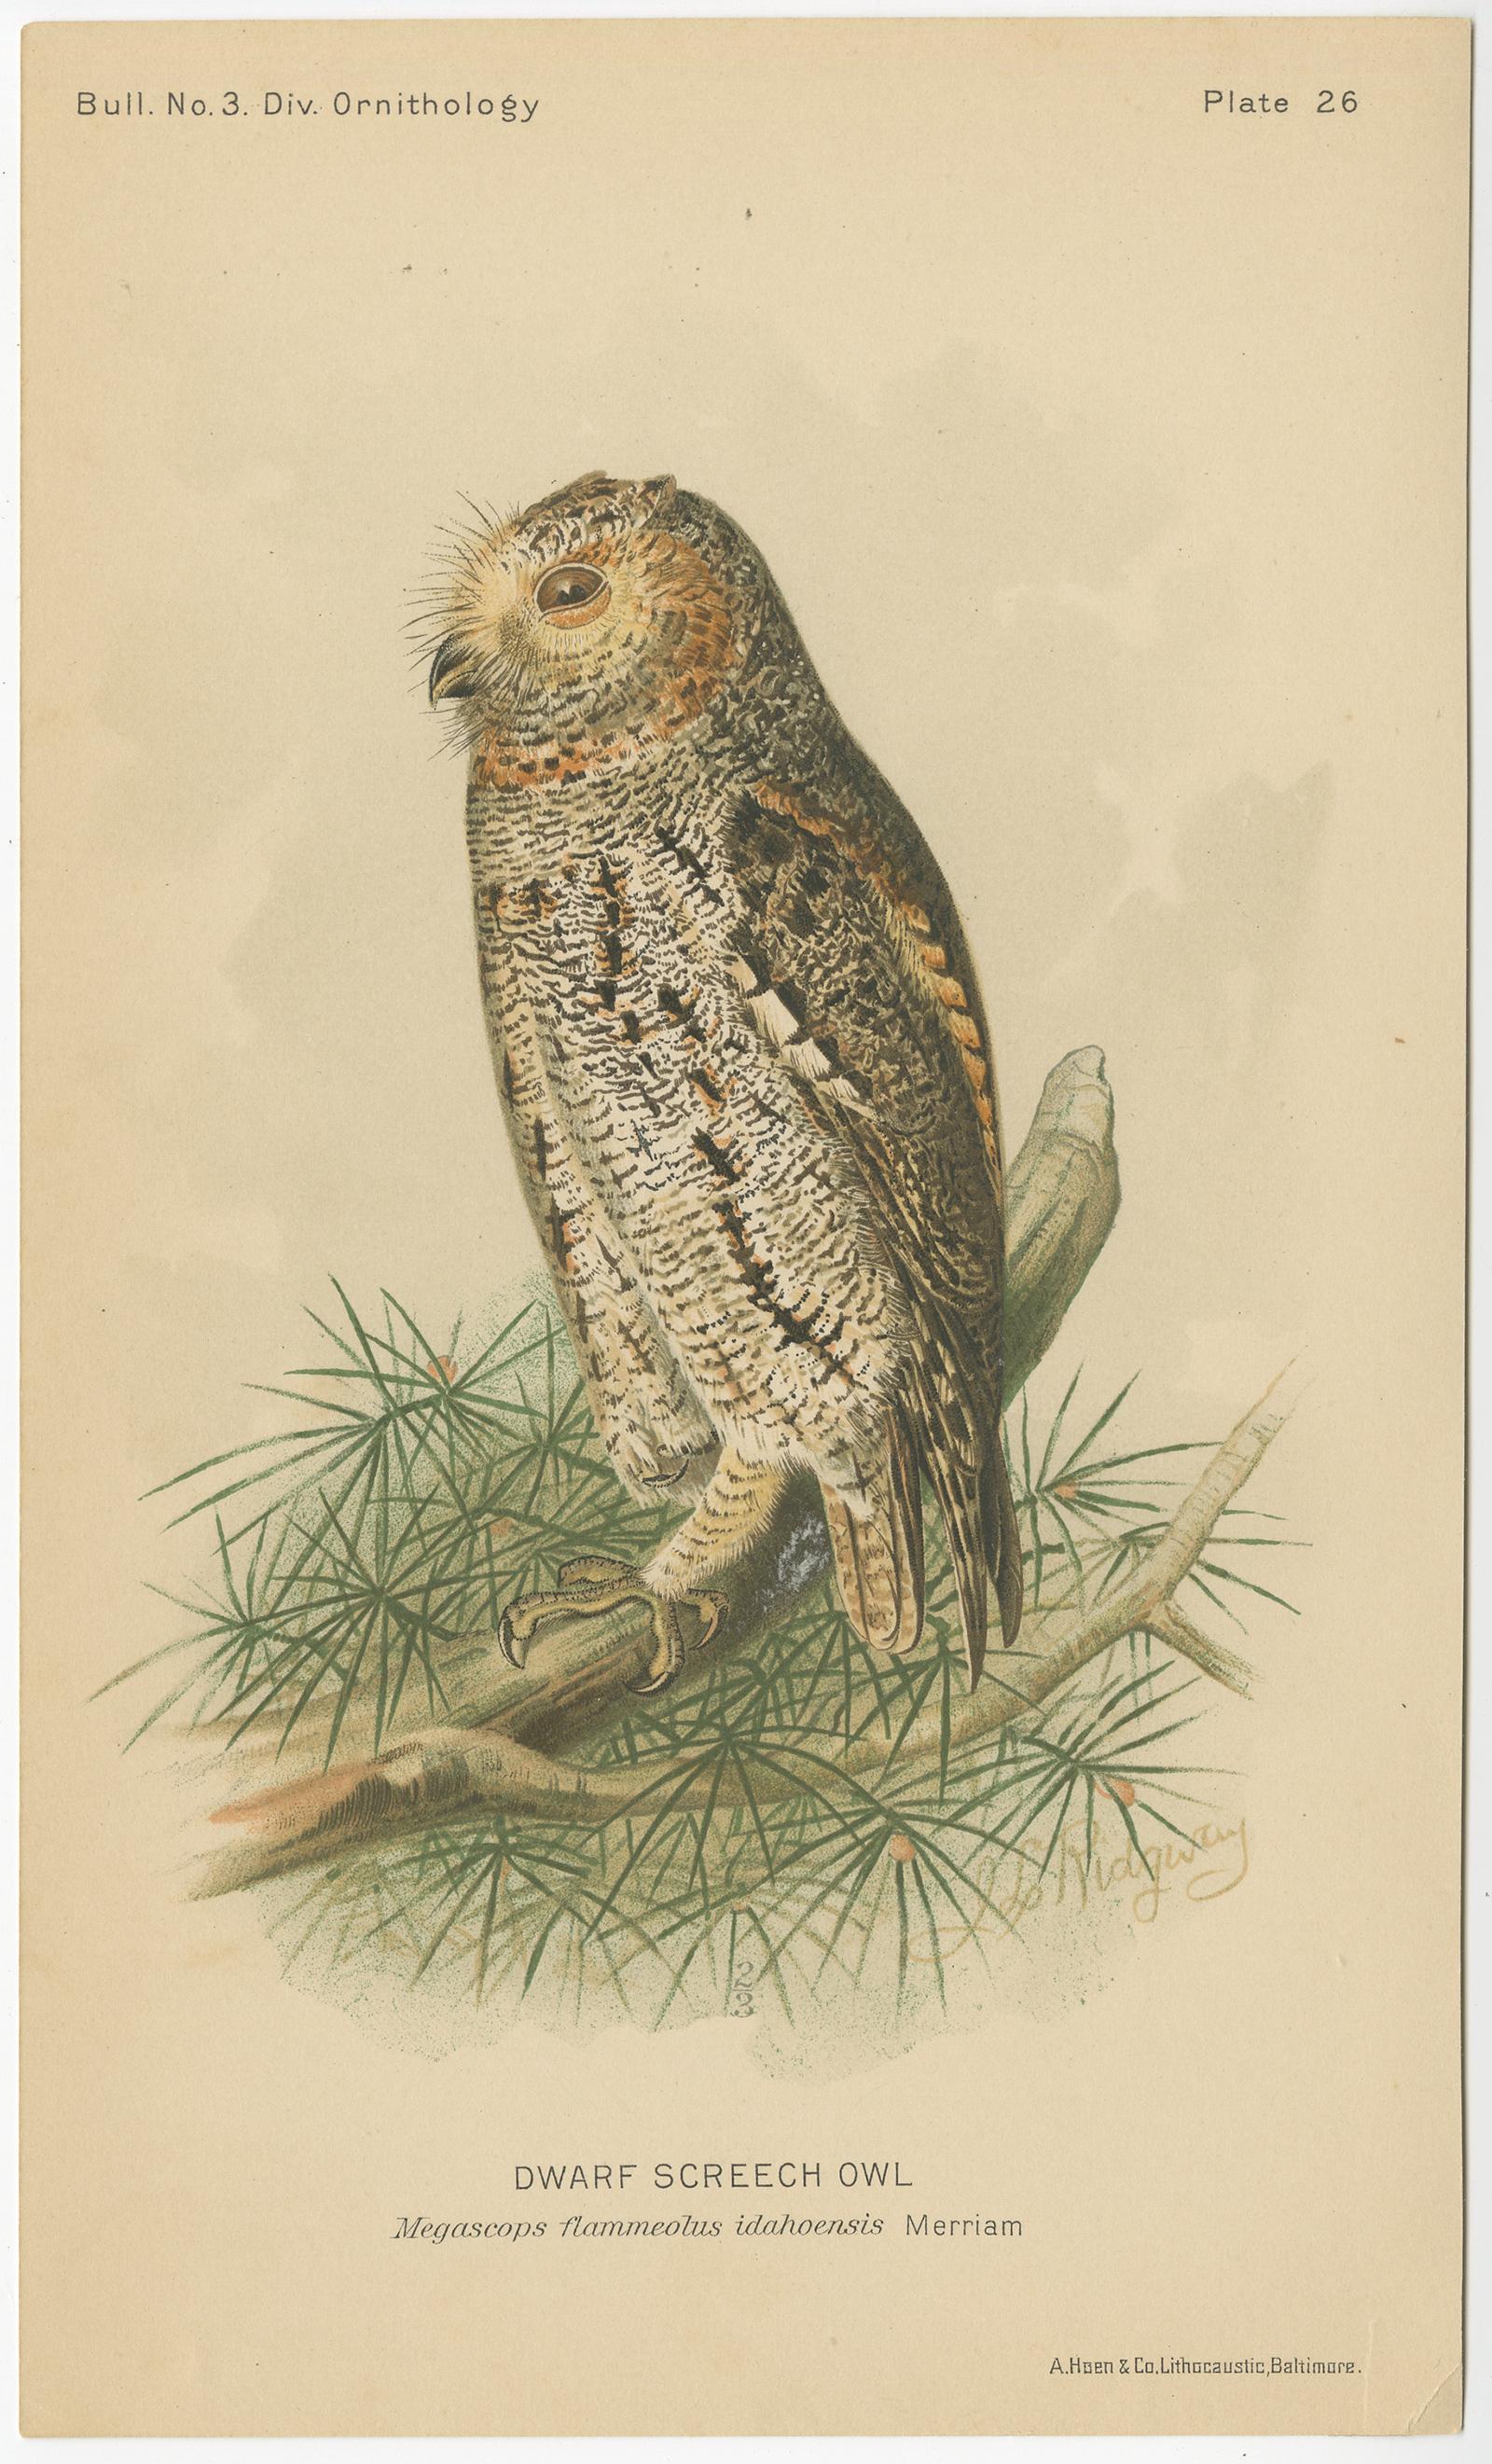 Set of three antique bird print titled 'Dwarf Screech Owl - Burrowing Owl - Great Horned Owl'. These prints originate from 'The Hawks and Owls of the United States' by C. Hart Merriam and A. K. Fisher. Illustrated by John L. Ridgway.